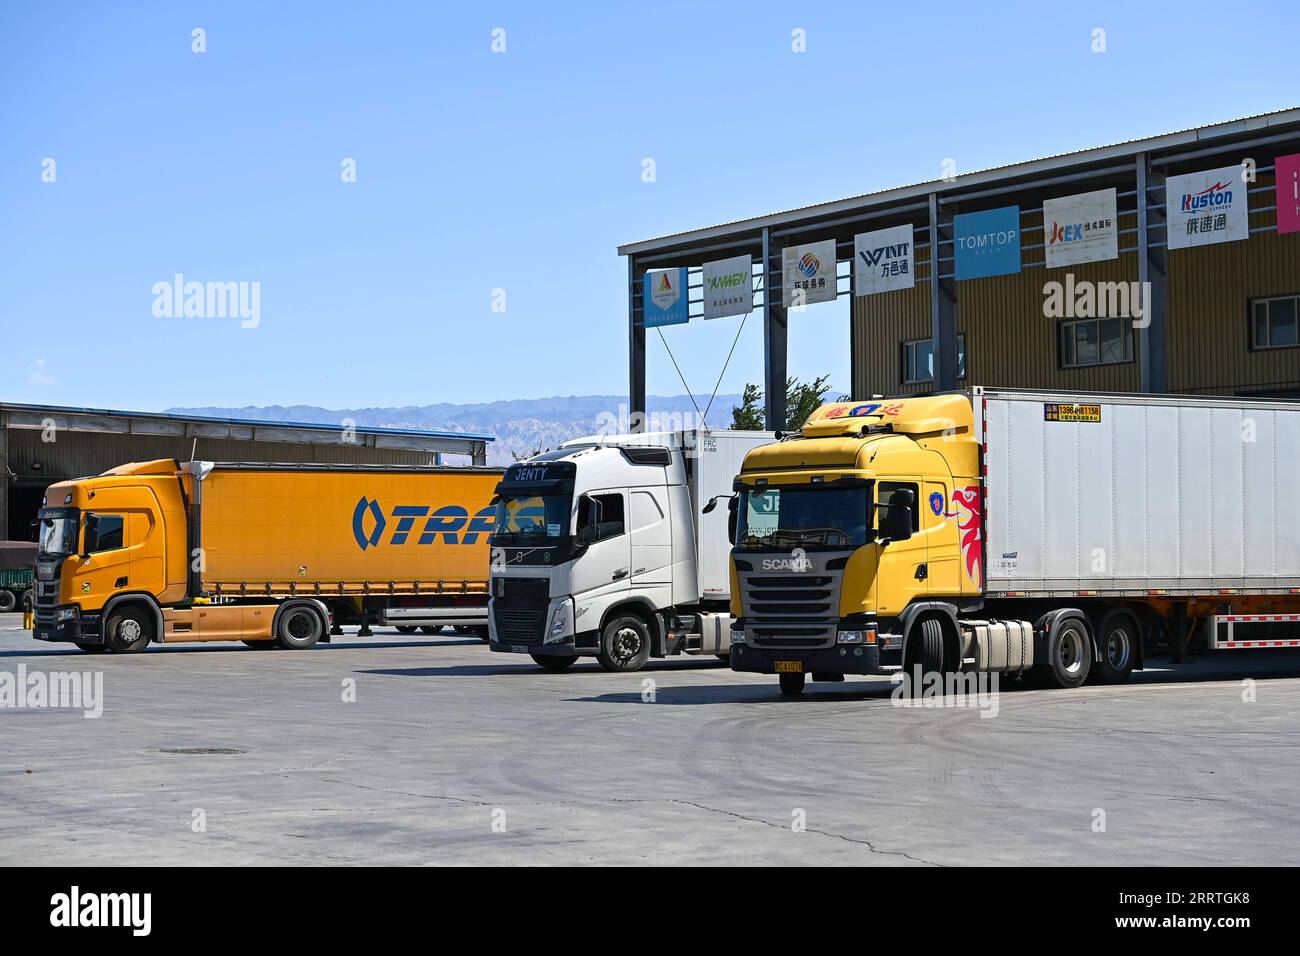 230725 -- ALATAW PASS, July 25, 2023 -- Cargo trucks wait to be loaded at the custom clearance center for the cross-border e-commerce of the Alataw Pass comprehensive bonded area in northwest China s Xinjiang Uygur Autonomous Region, July 24, 2023. In recent years, various measures have been taken to create a better business environment for cross-border e-commerce enterprises in Alataw Pass. The cross-border e-commerce business was launched in the inland port in northwest China s Xinjiang Uygur Autonomous Region in January 2020. In the first half of this year, more than 14.50 million cross-bor Stock Photo